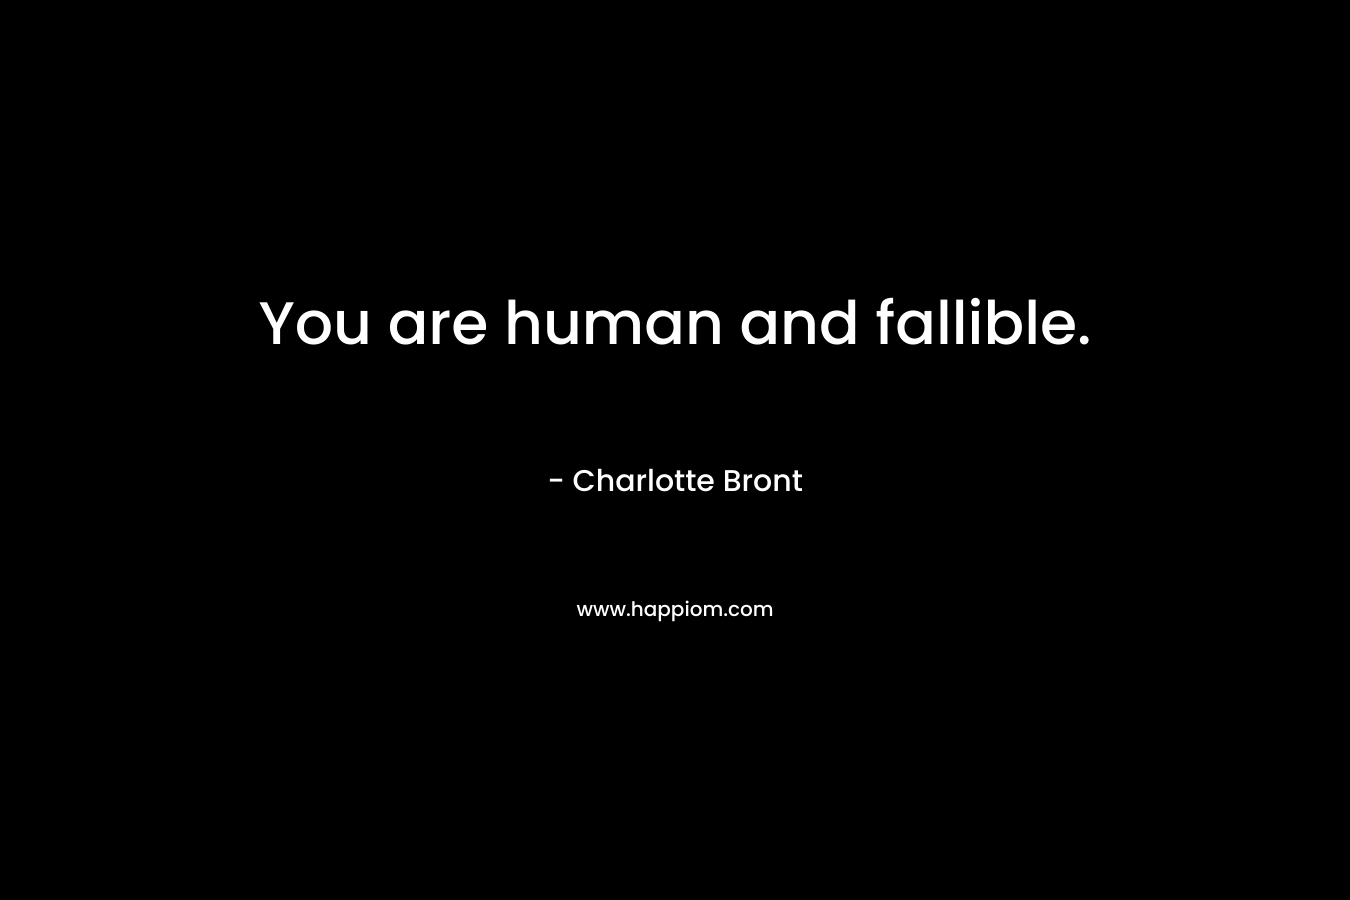 You are human and fallible. – Charlotte Bront